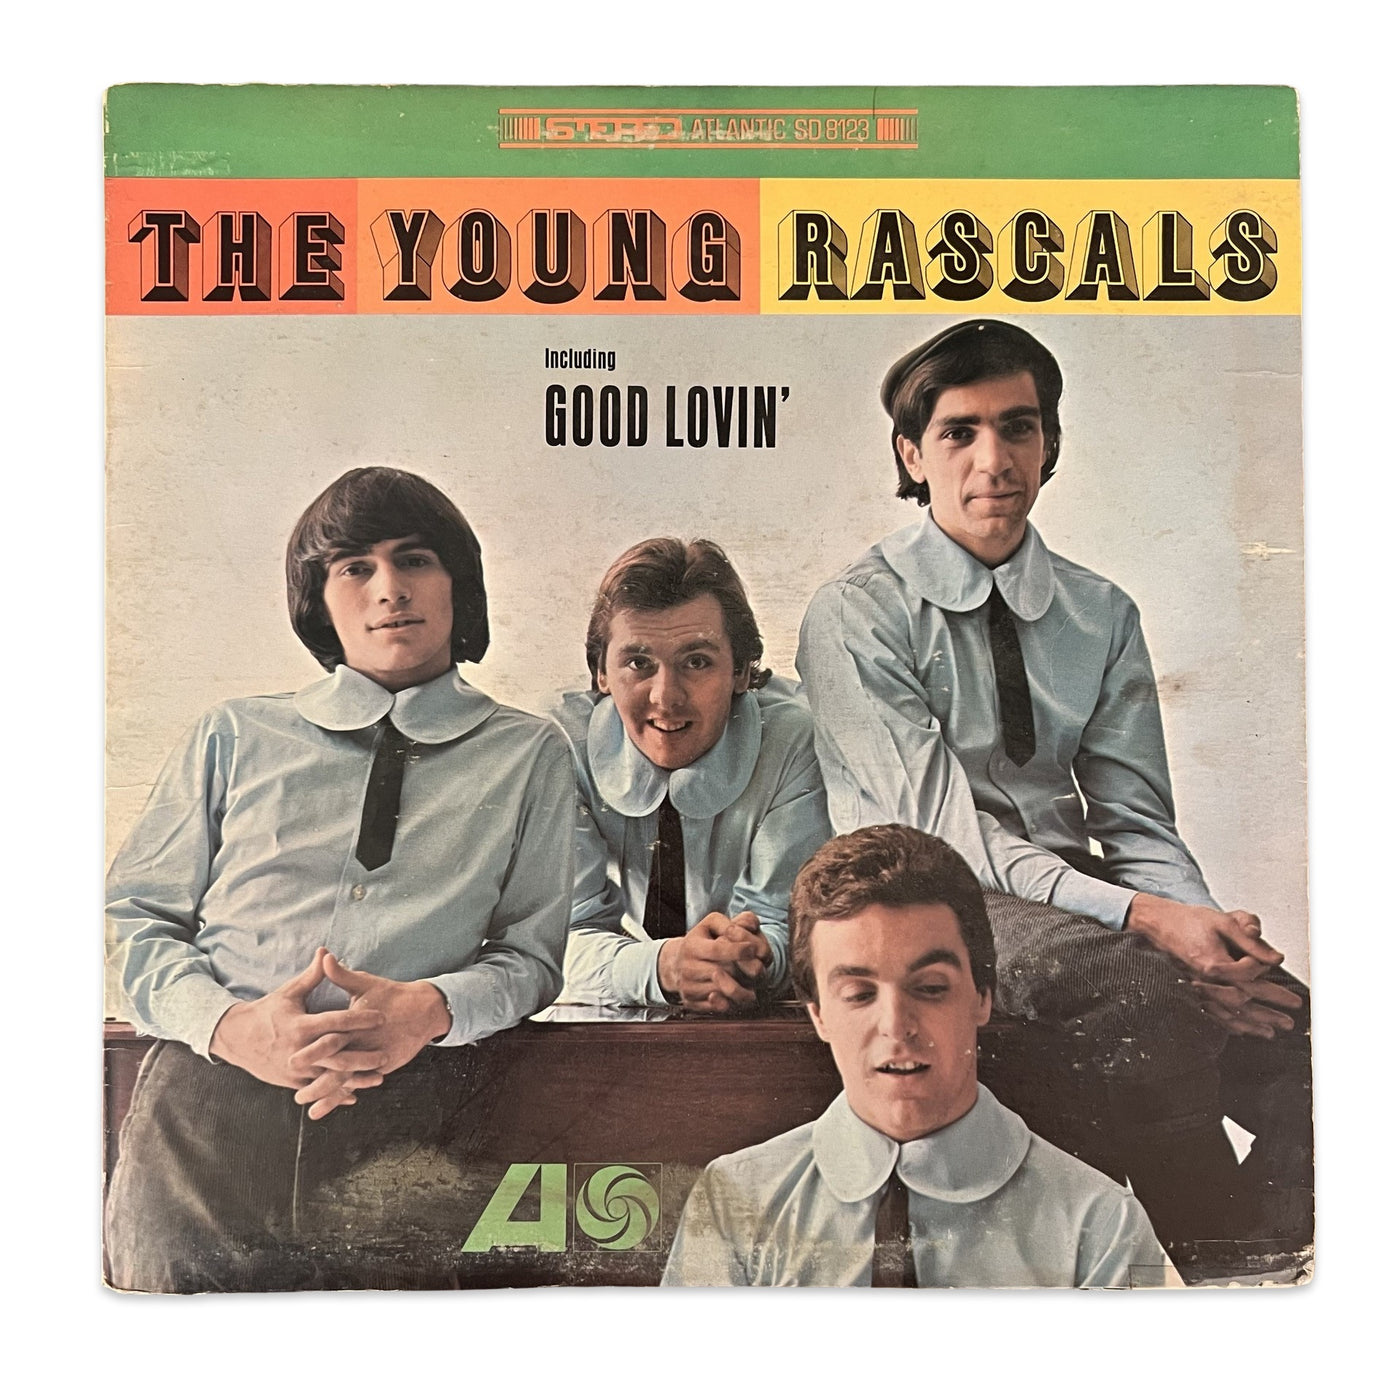 The Young Rascals – The Young Rascals